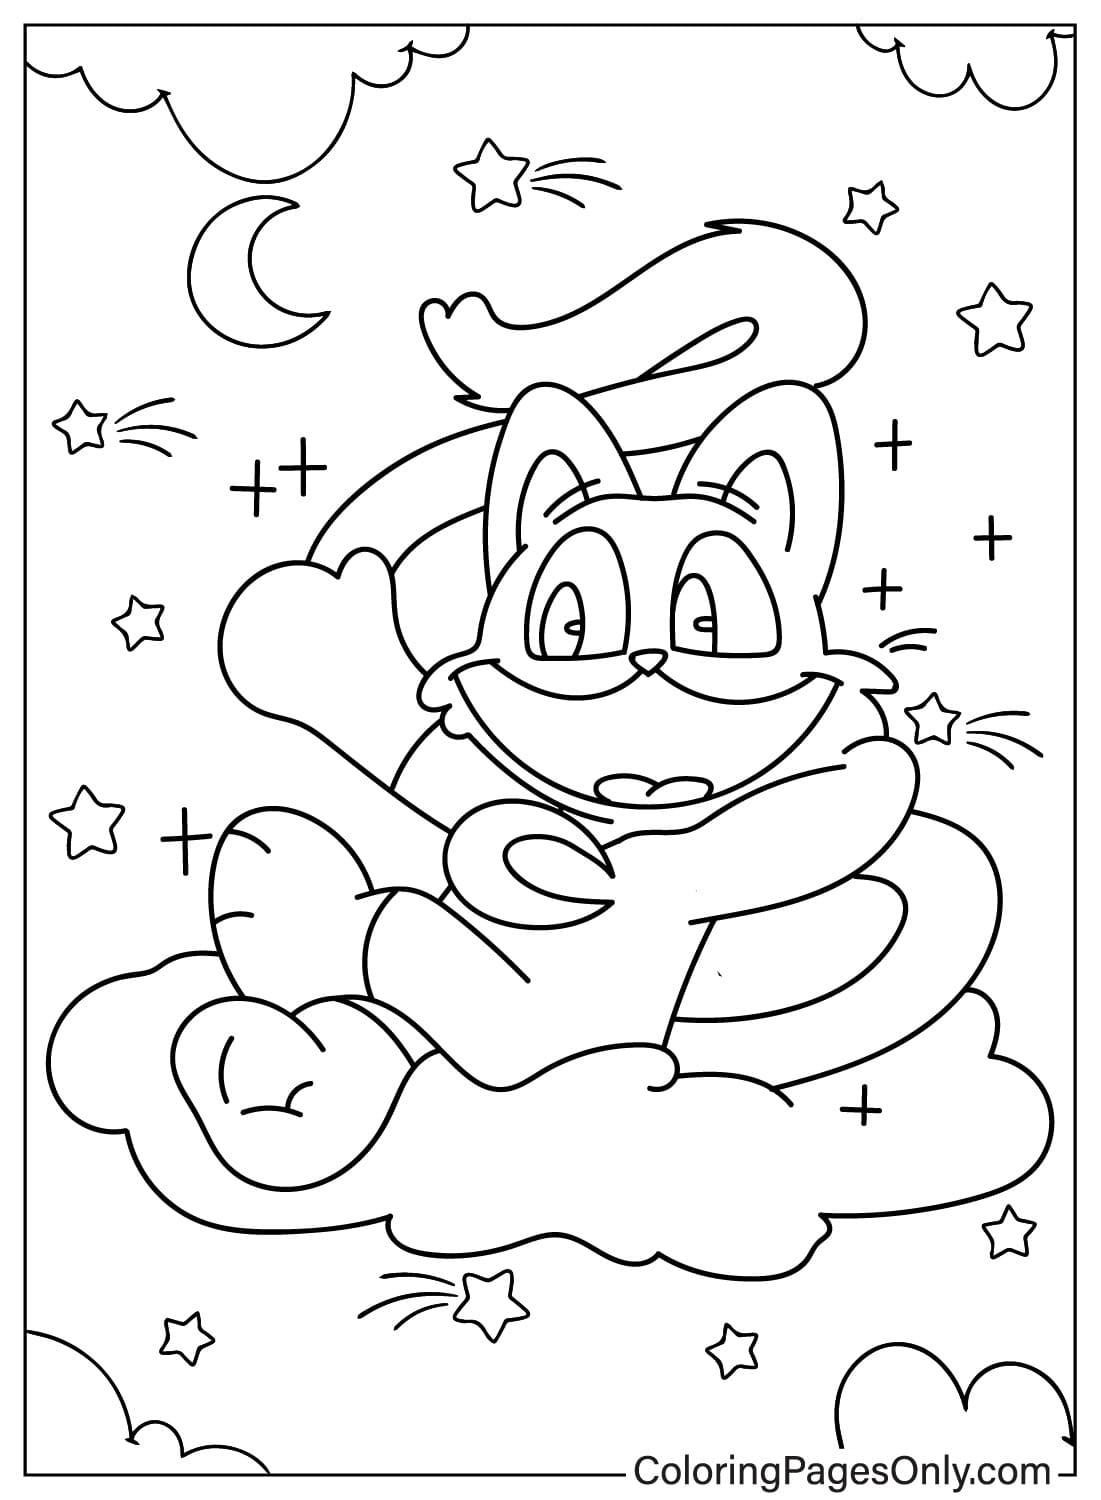 Free Printable CatNap Coloring Page from CatNap